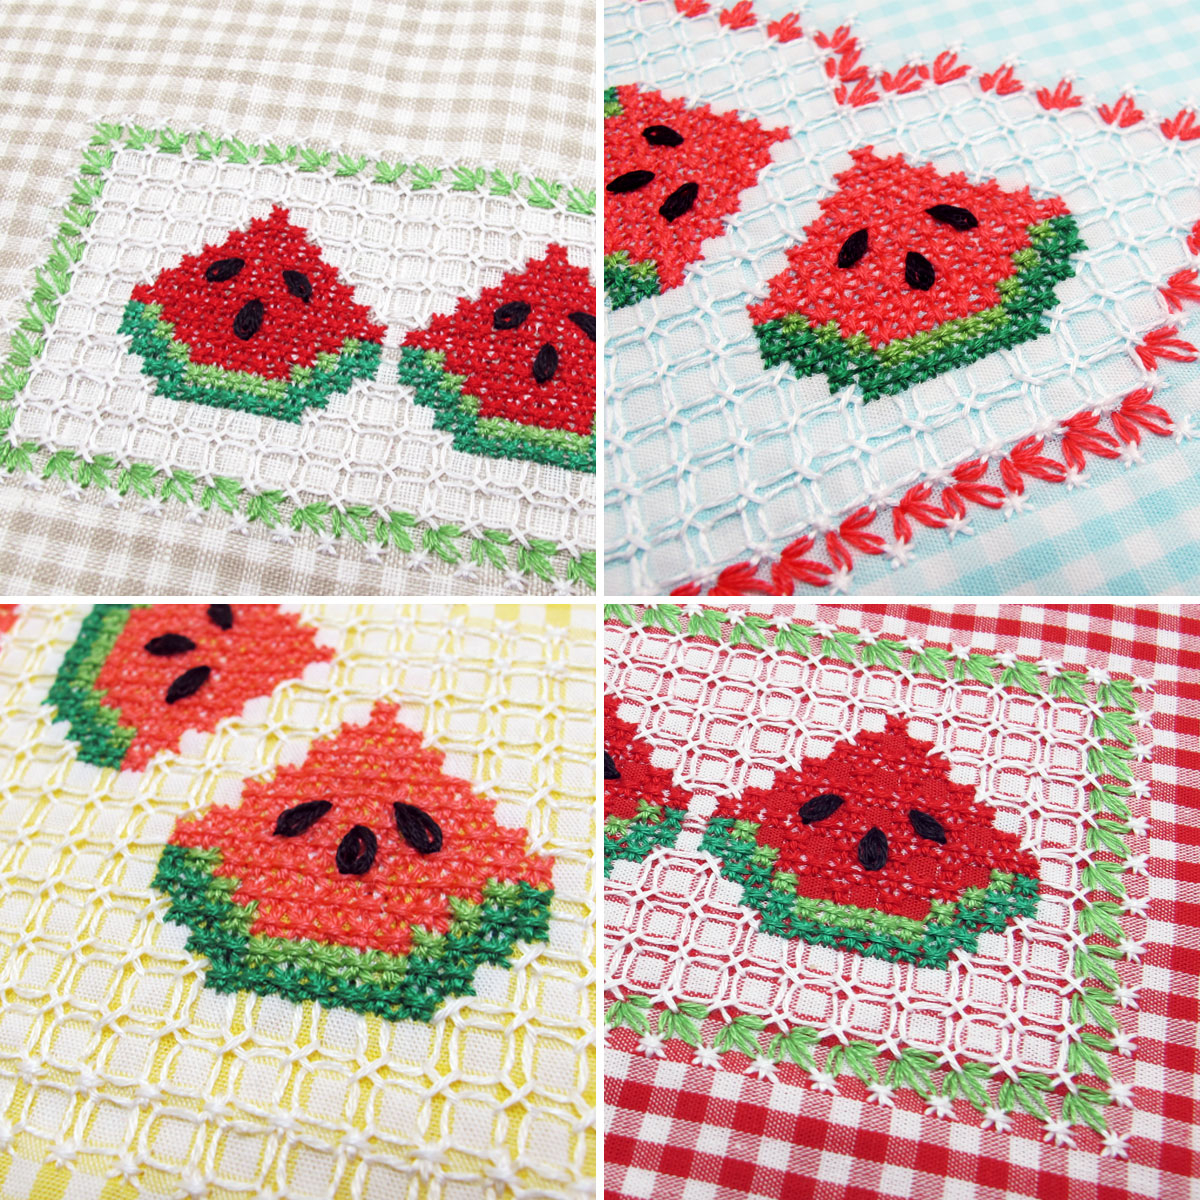 Chicken Scratch Embroidery Patterns Free Diy Watermelon Embroidery